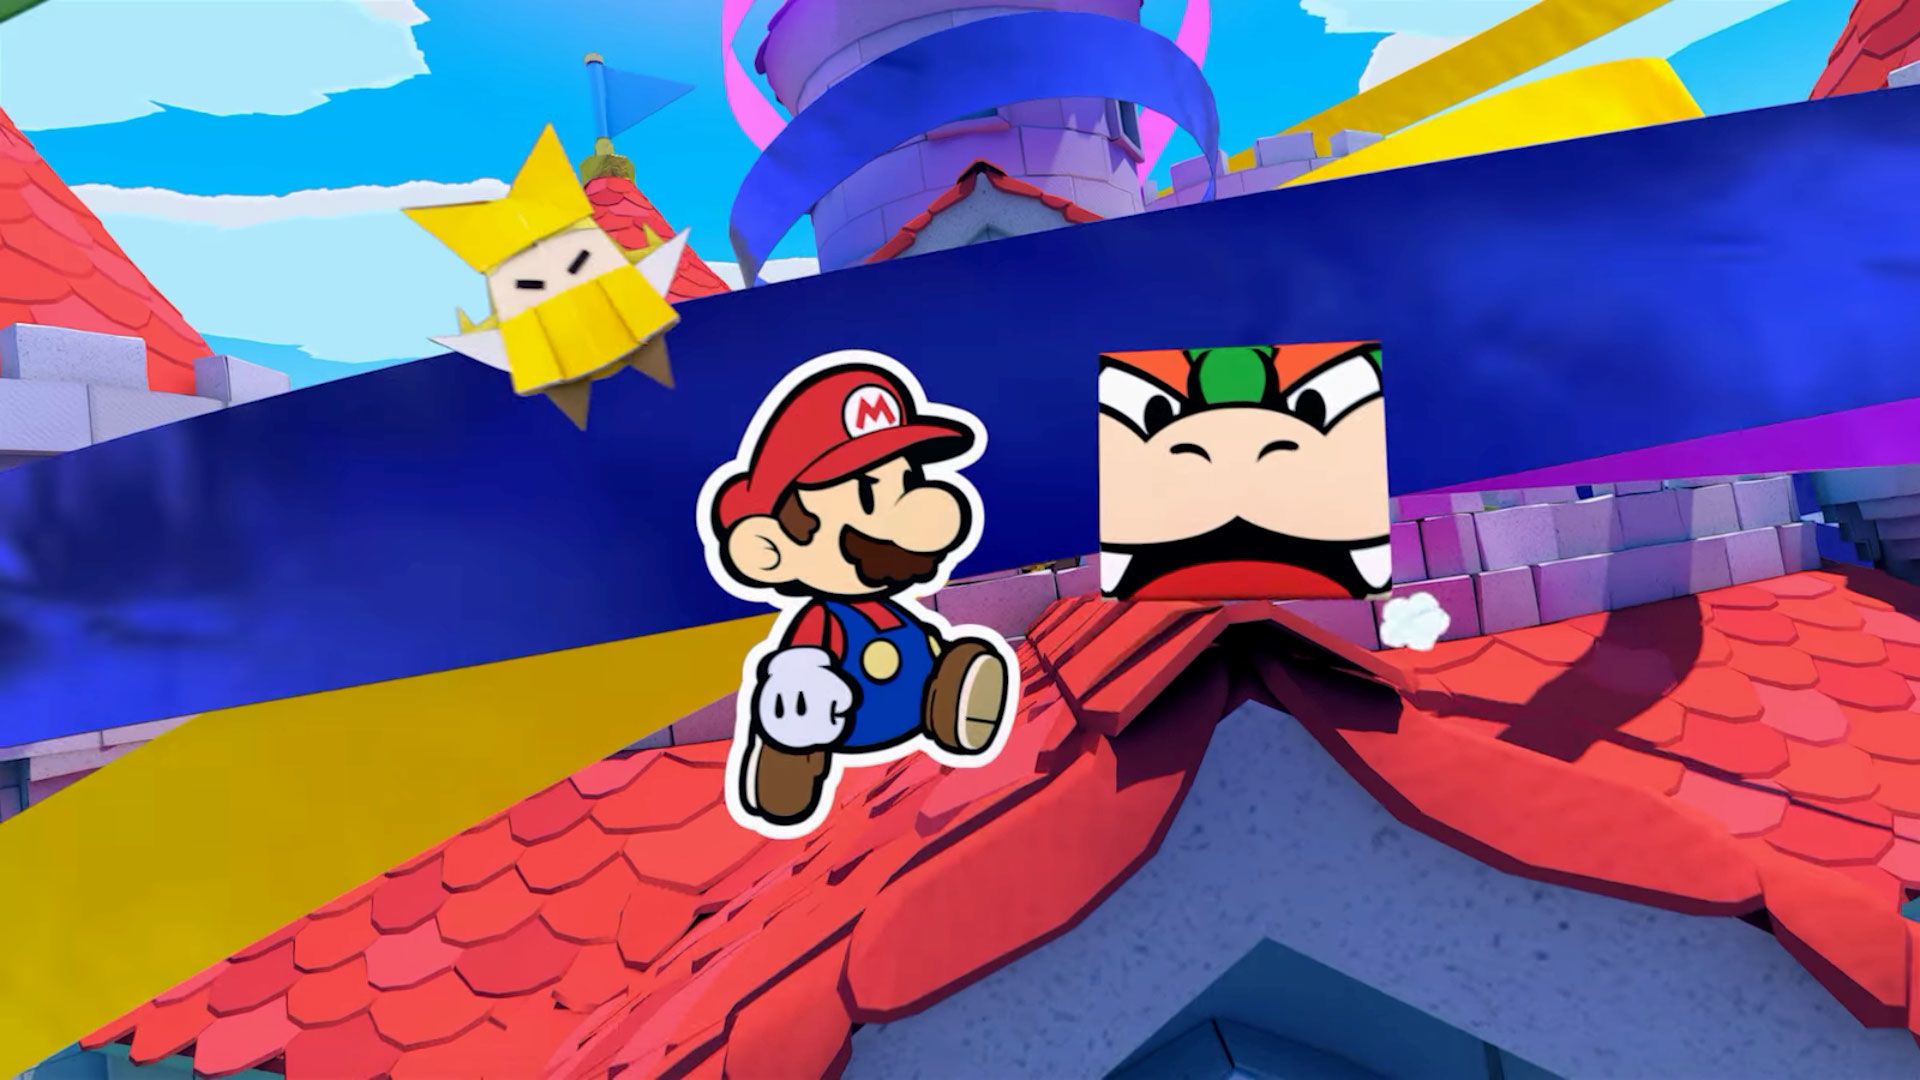 Paper Mario' is coming to the Nintendo Switch in July